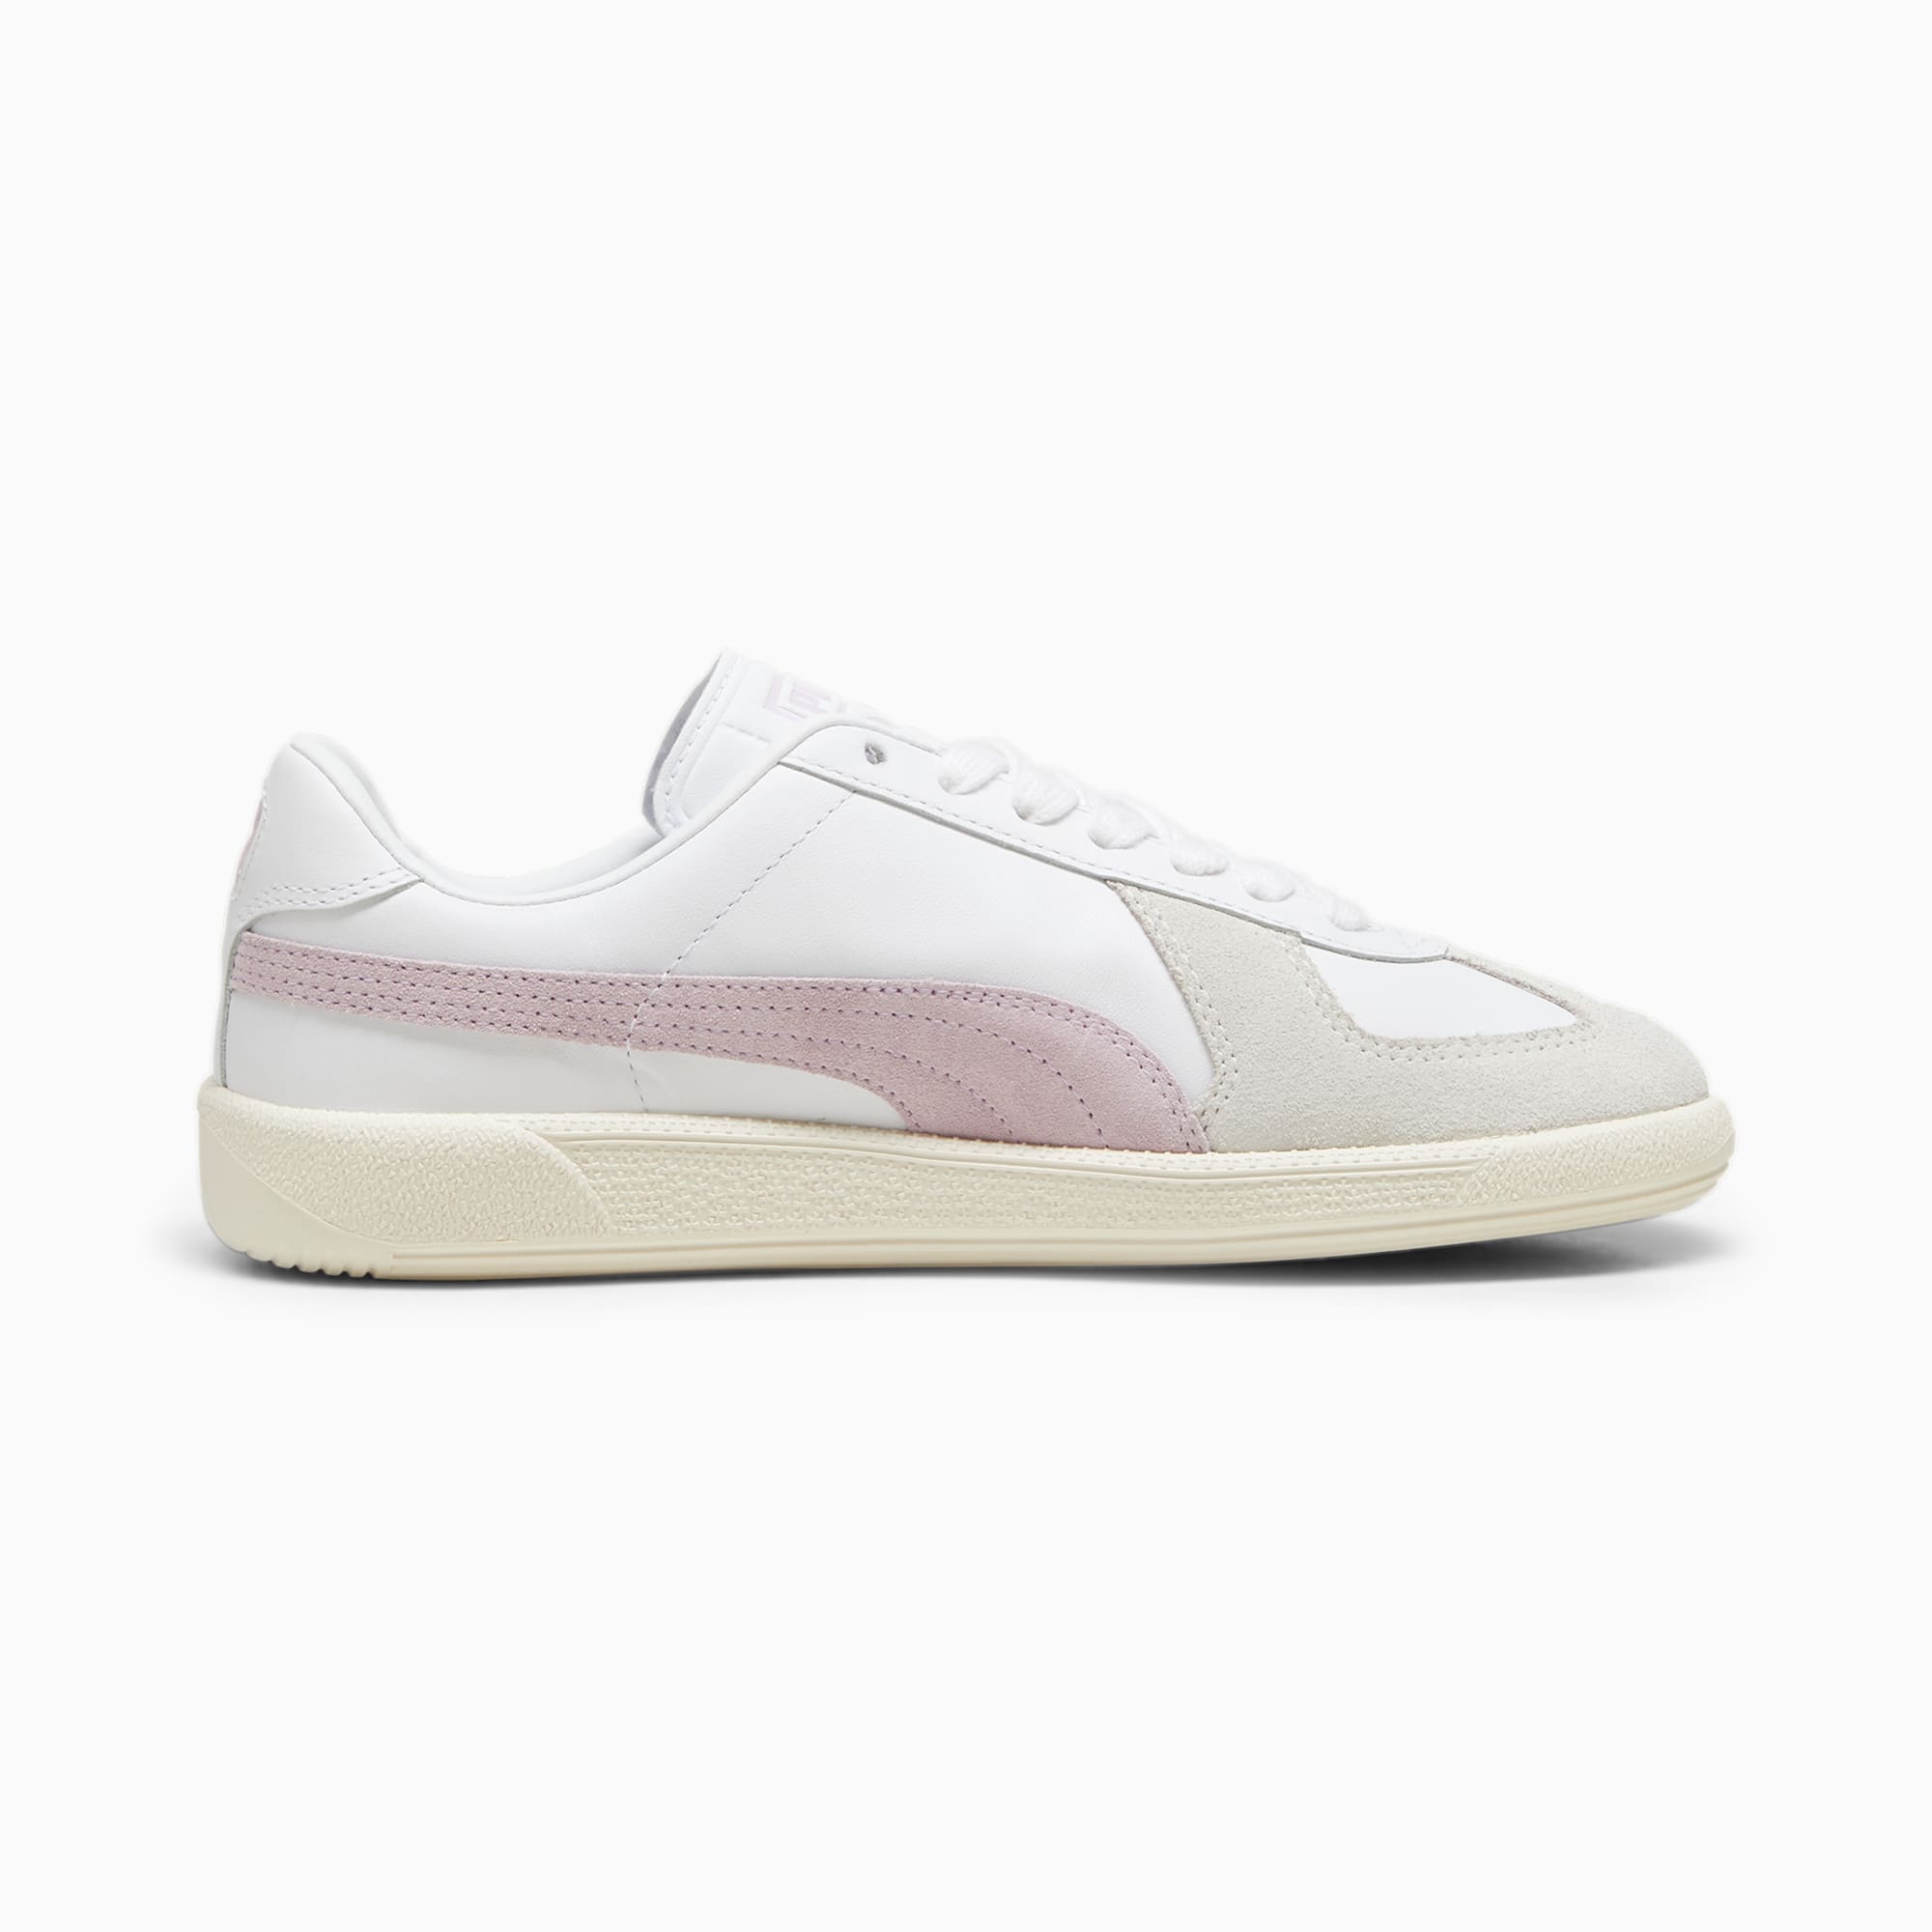 Women's PUMA Army Trainer Sneakers, White/Feather Grey/Grape Mist, Size 35,5, Shoes